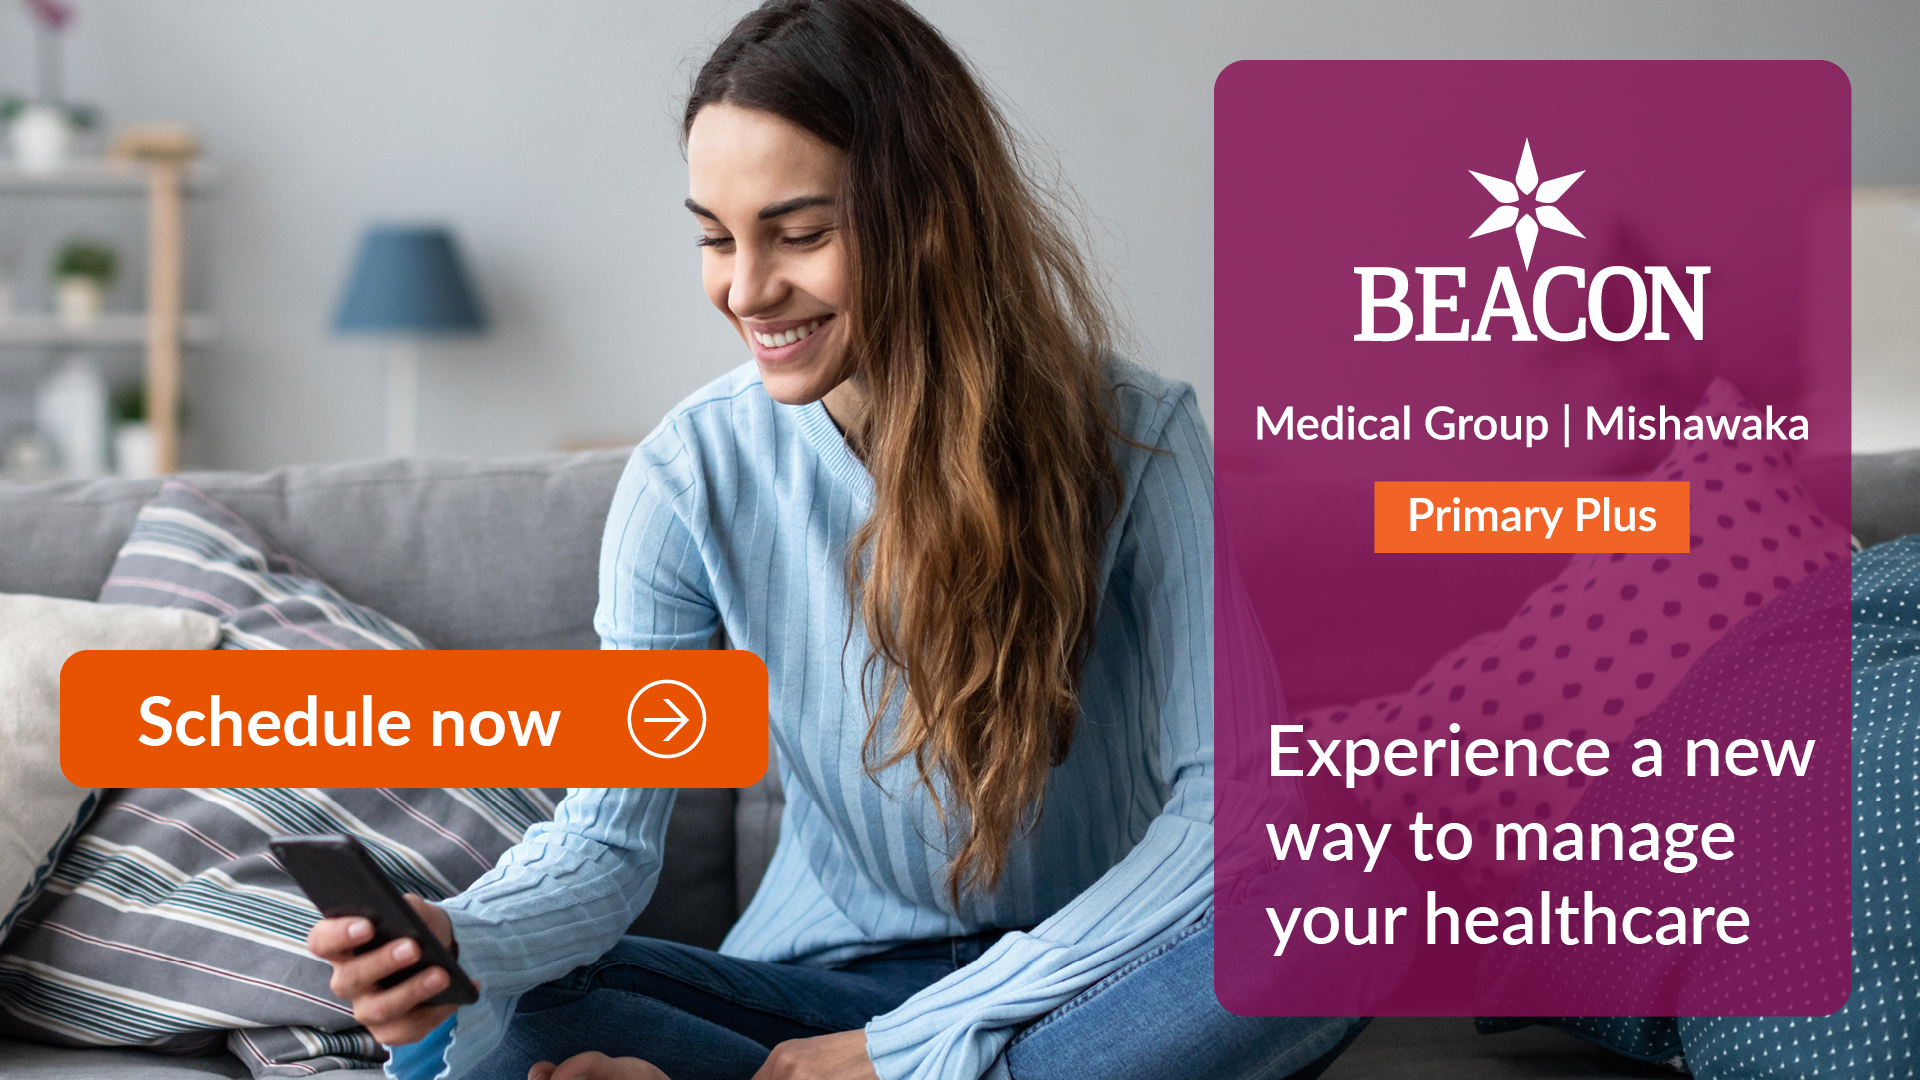 Beacon Medical Group Primary Plus